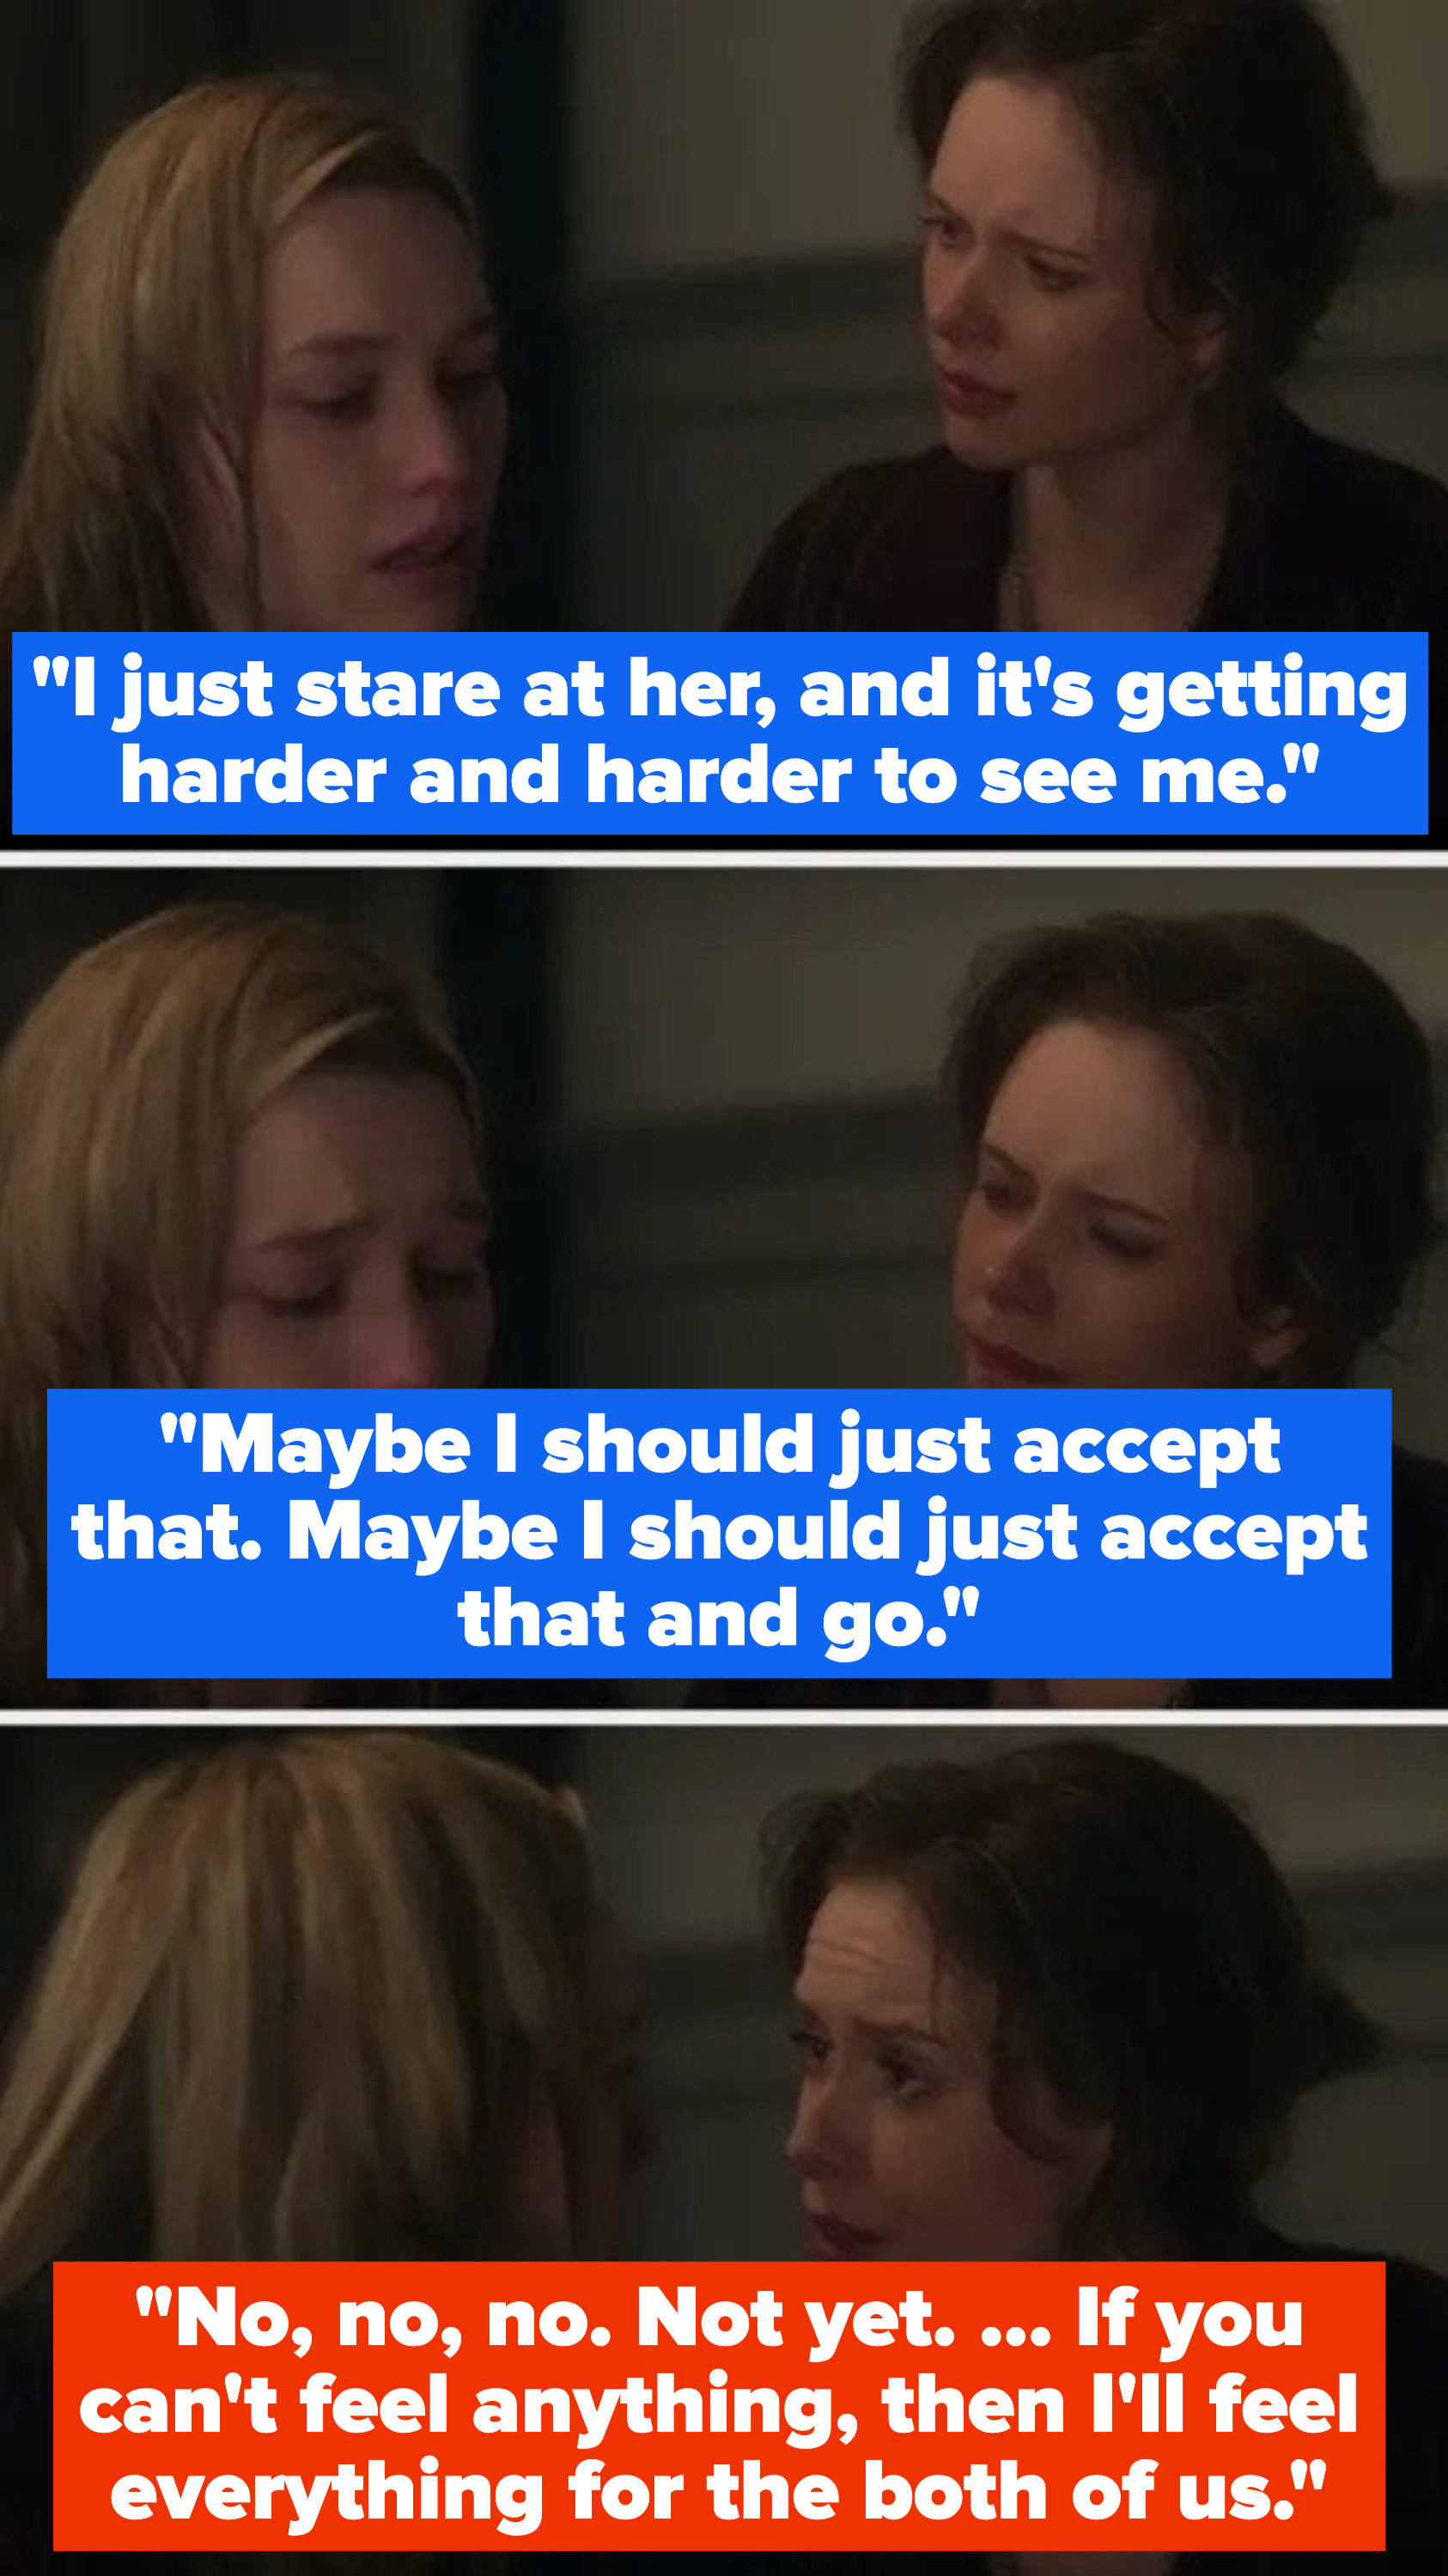 Dani says it&#x27;s getting harder and harder to see herself in her reflection, and maybe she should accept that and go, but Jamie tells her not yet, and that she&#x27;ll feel for the both of them